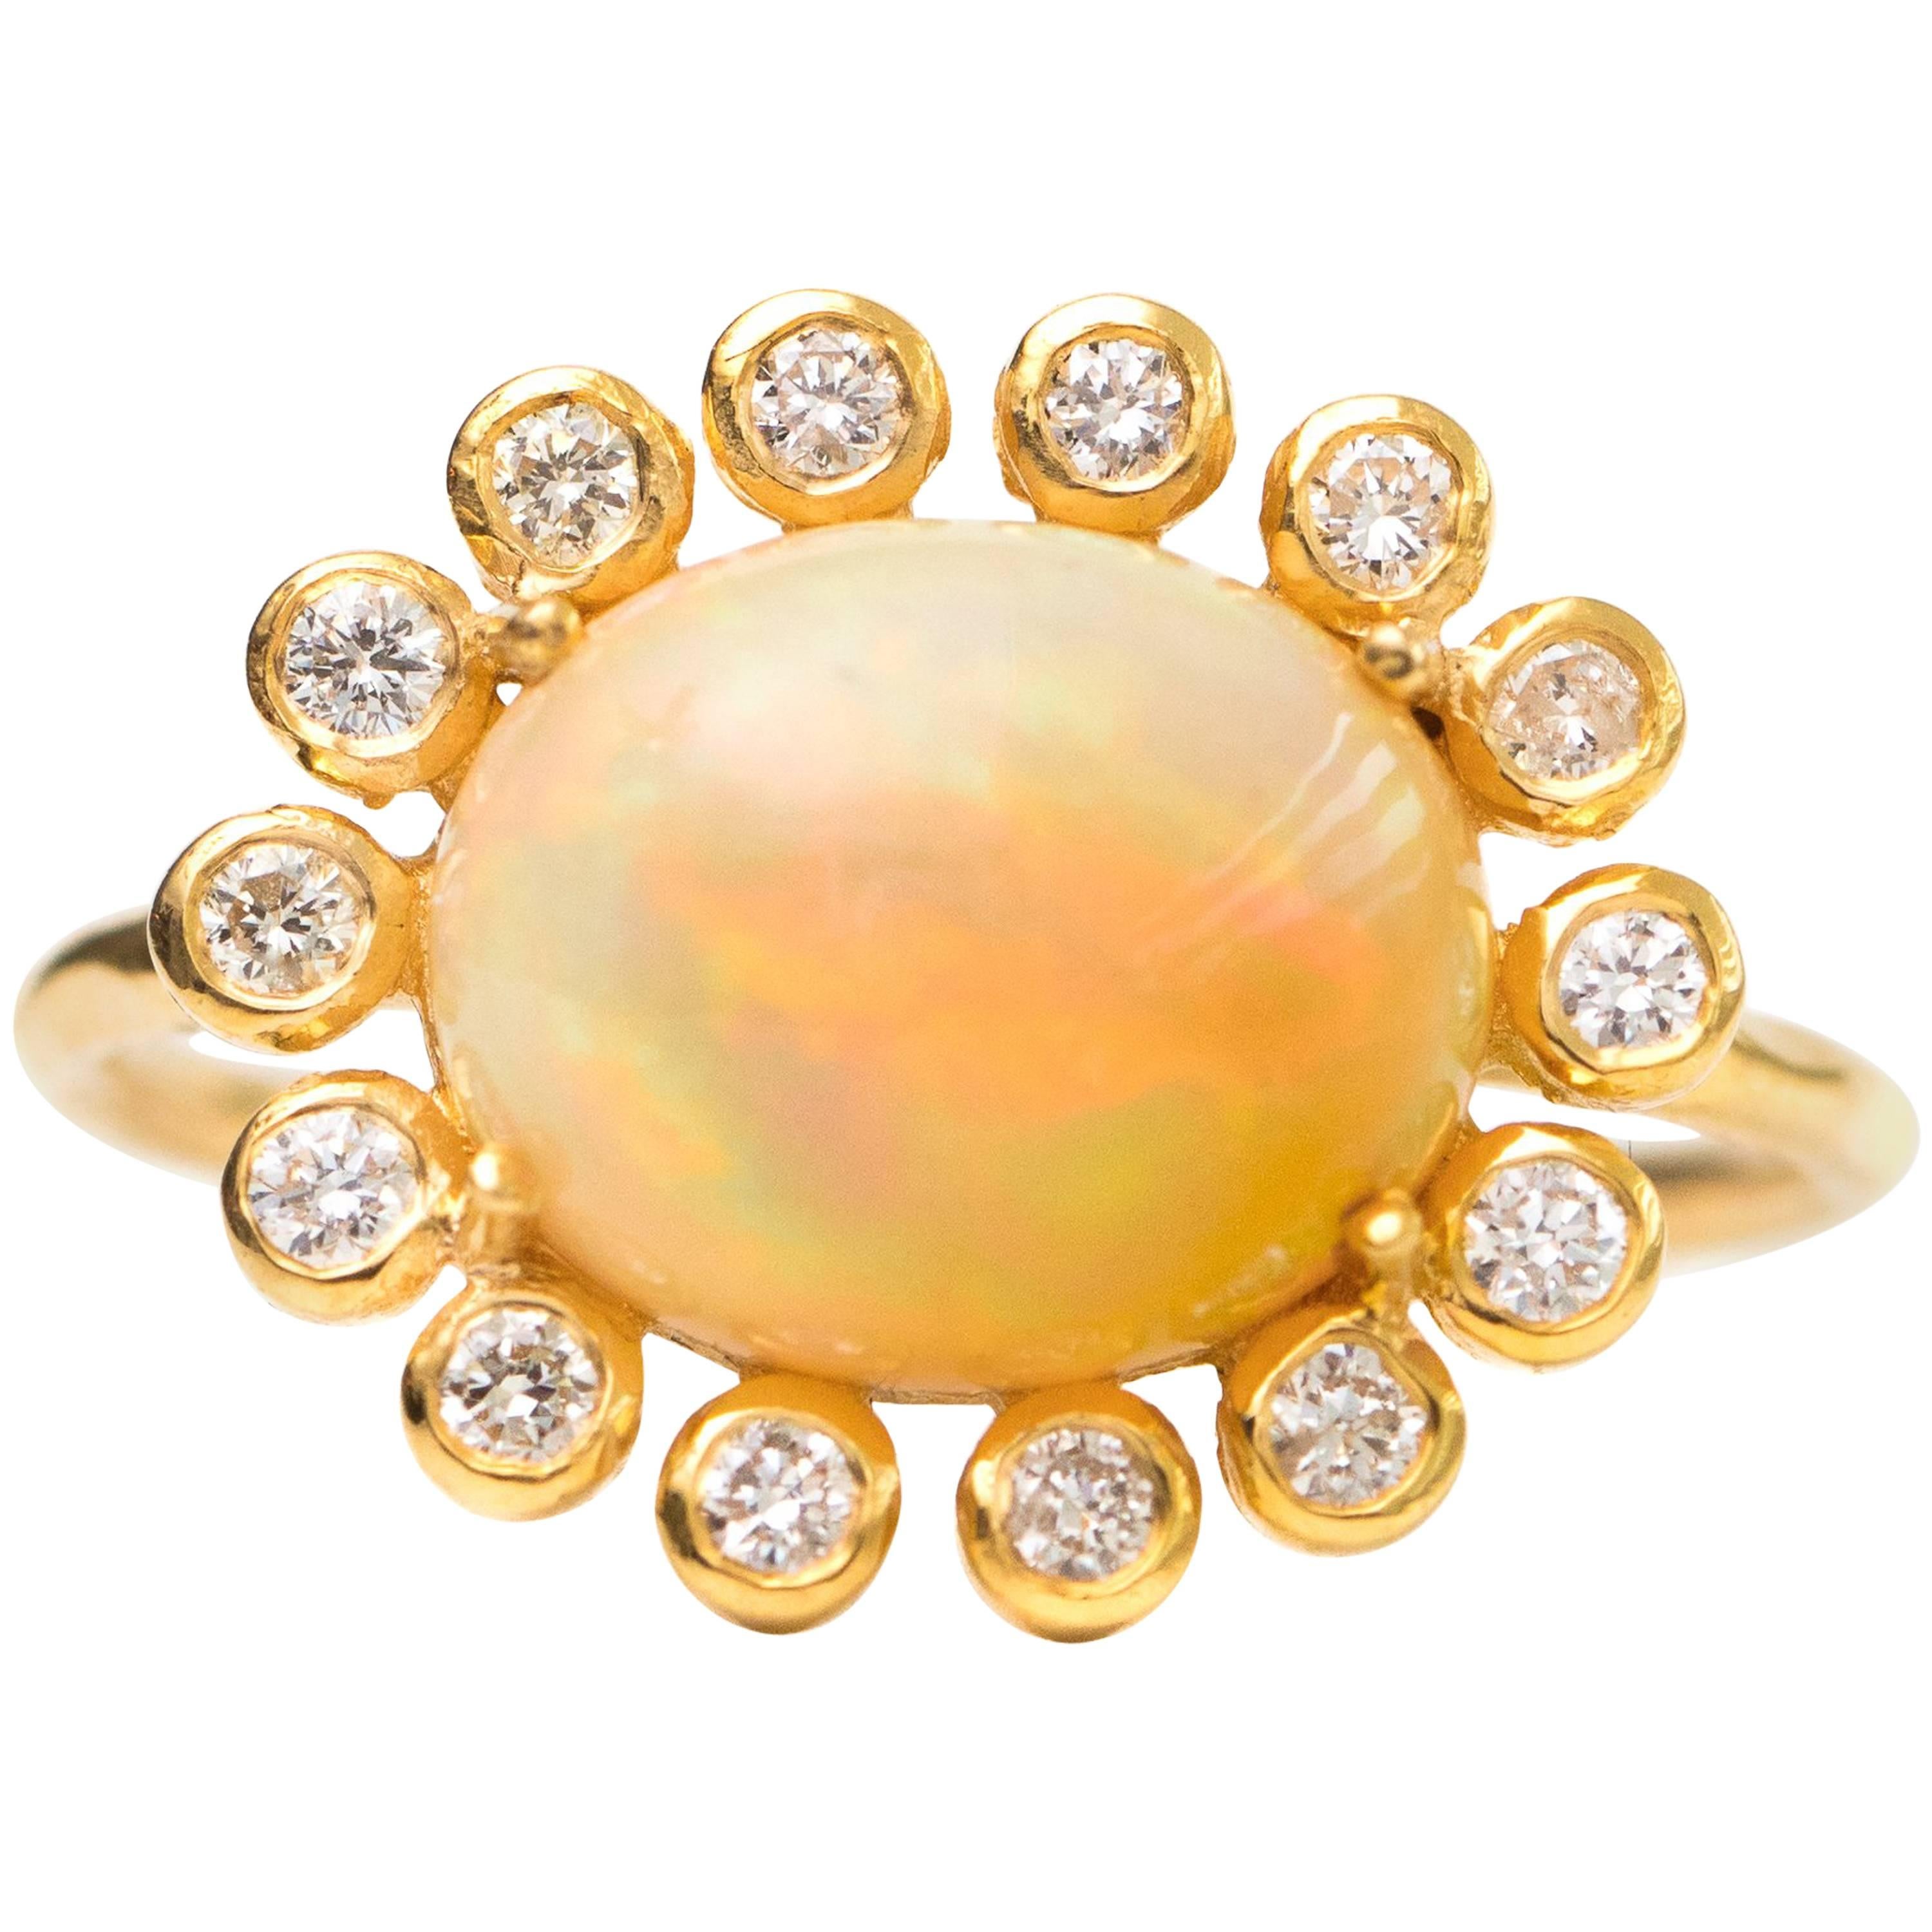 2.7 Carat Opal with Diamond Halo, 18 Karat Yellow Gold Ring For Sale